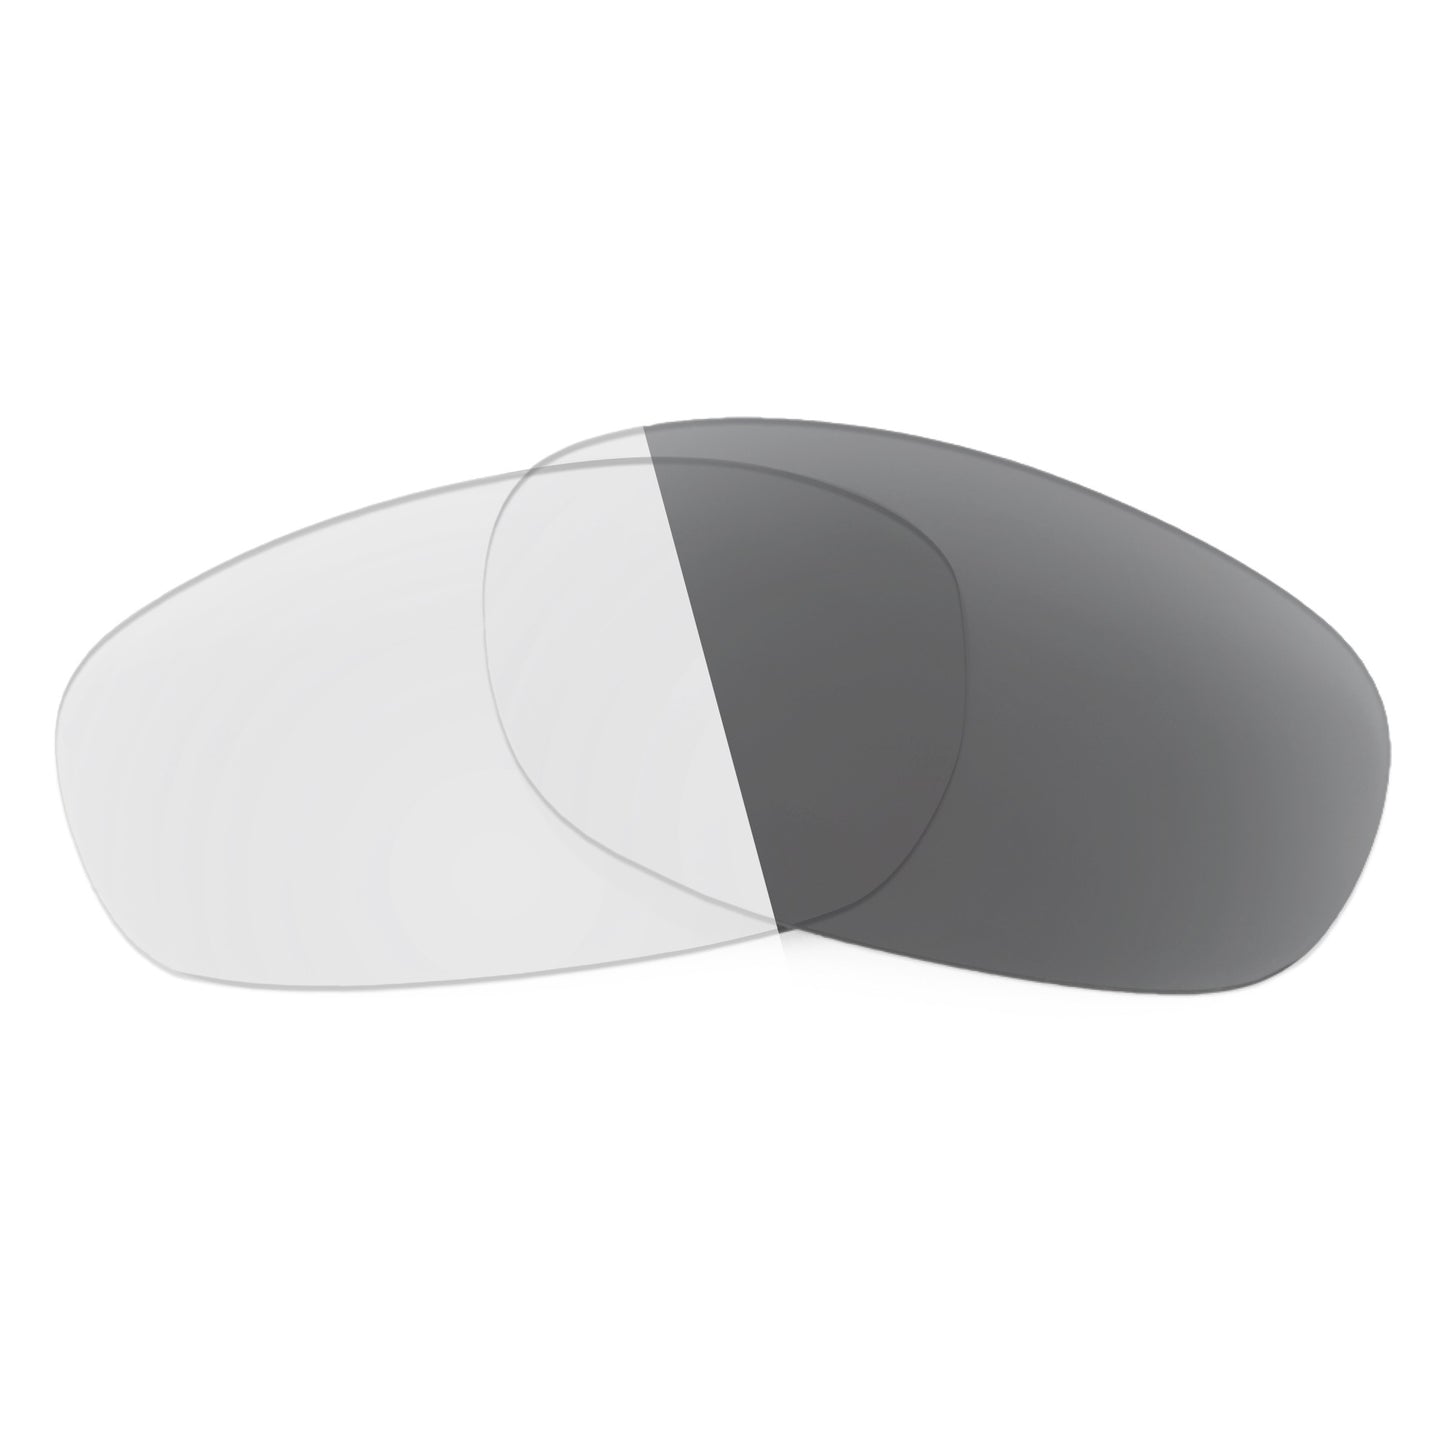 Revant replacement lenses for Ray-Ban RB4122 50mm Non-Polarized Adapt Gray Photochromic